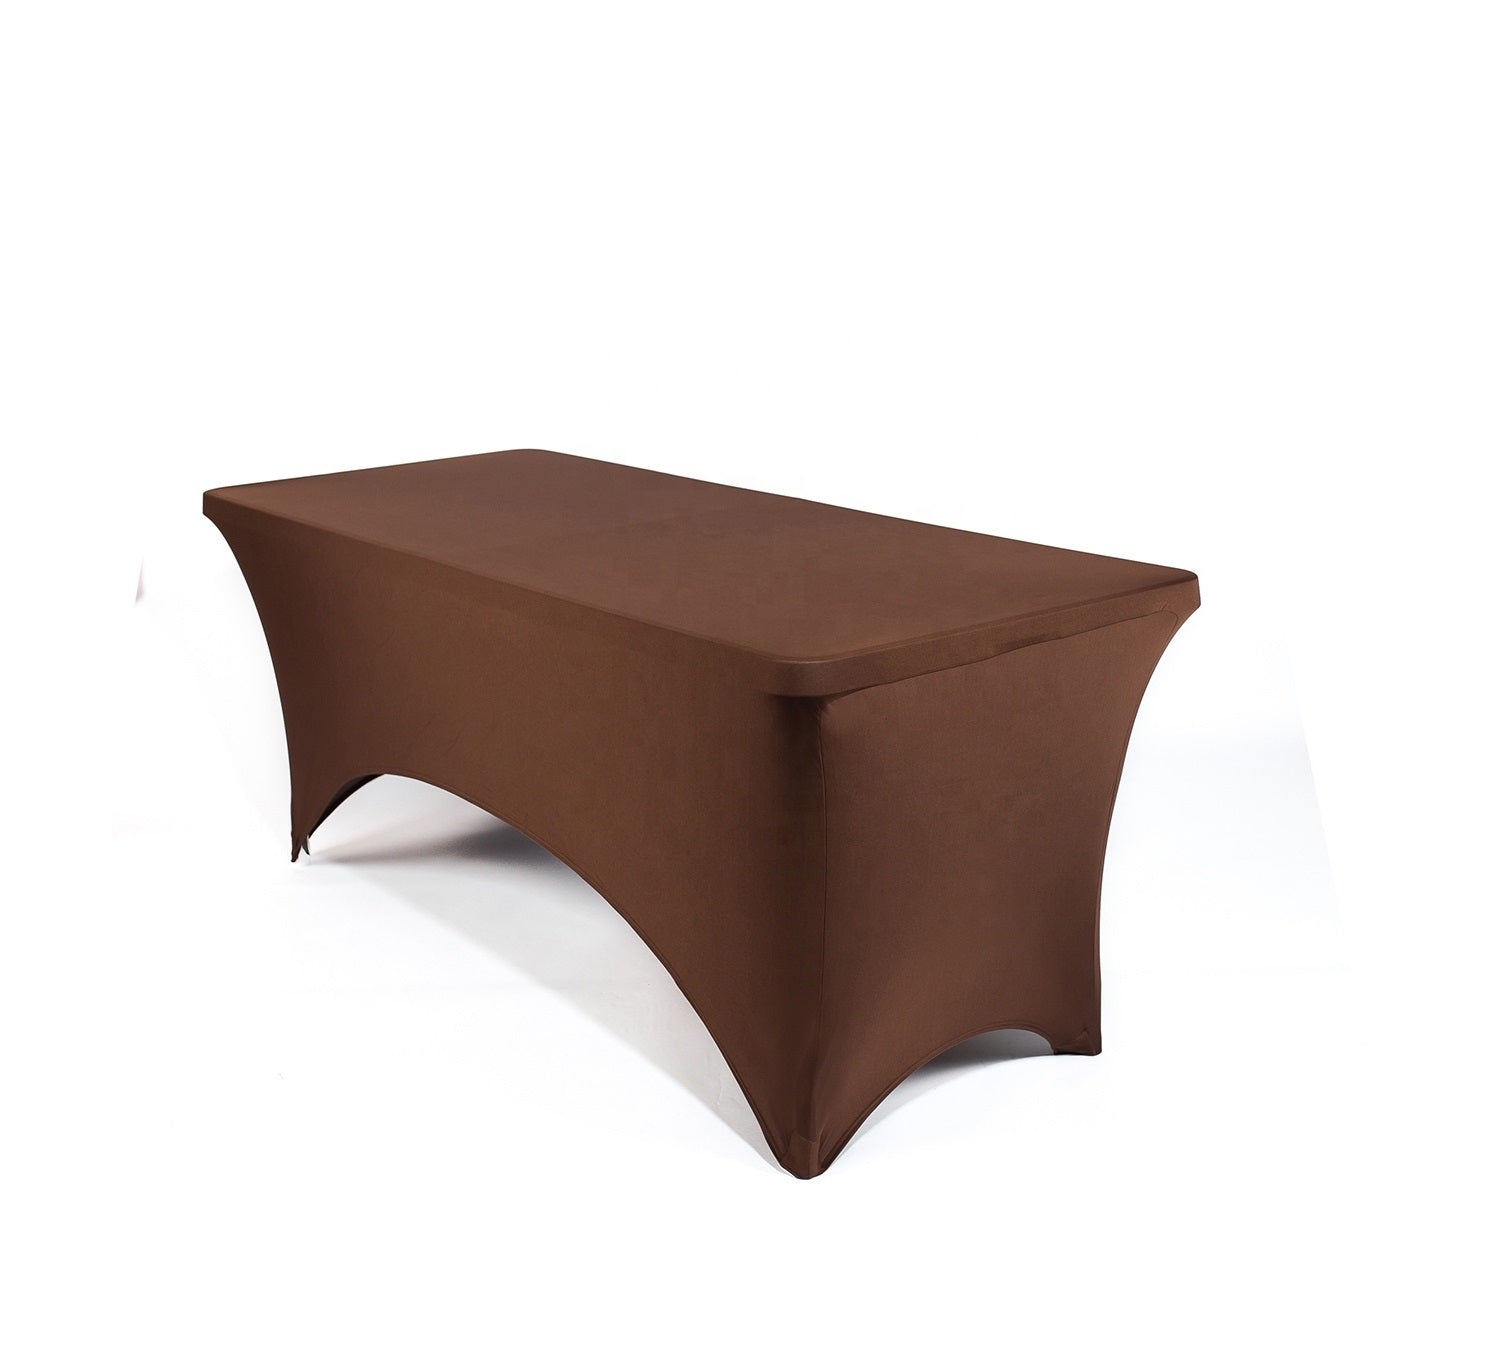 Stretchable Polyester Rectangle Tablecloth